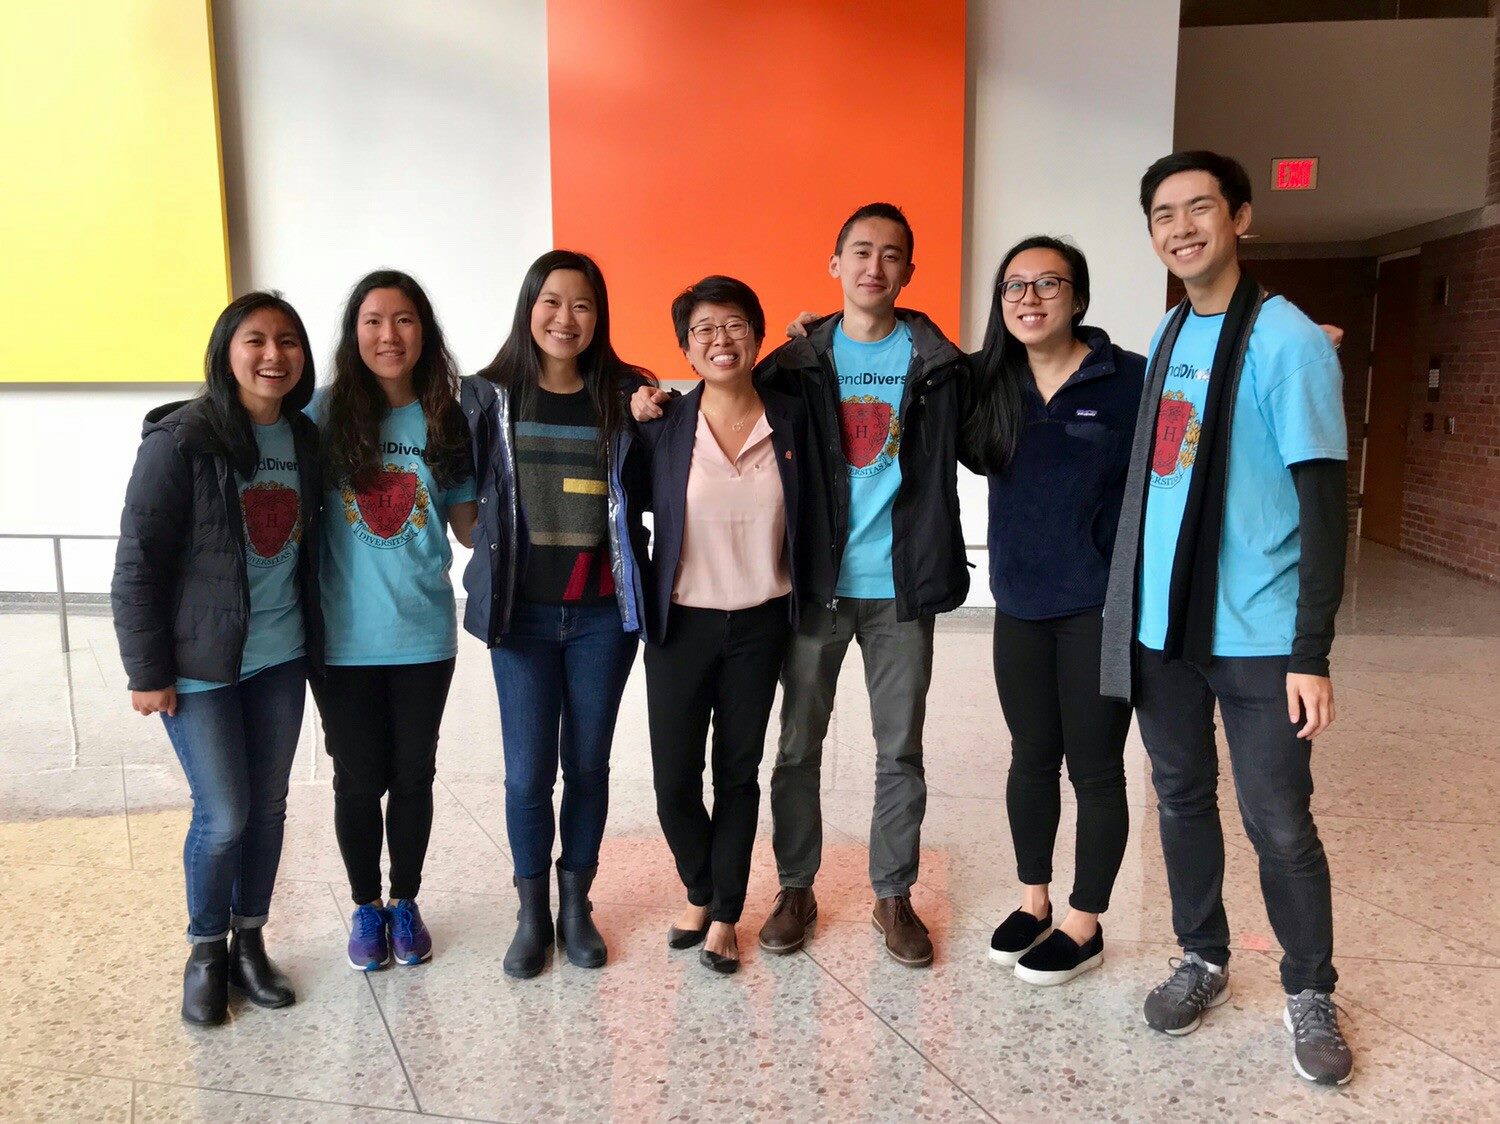 Seven Asian American students pose together for a photo. Many of them are wearing a T-shirt that says, "Defend Diversity"